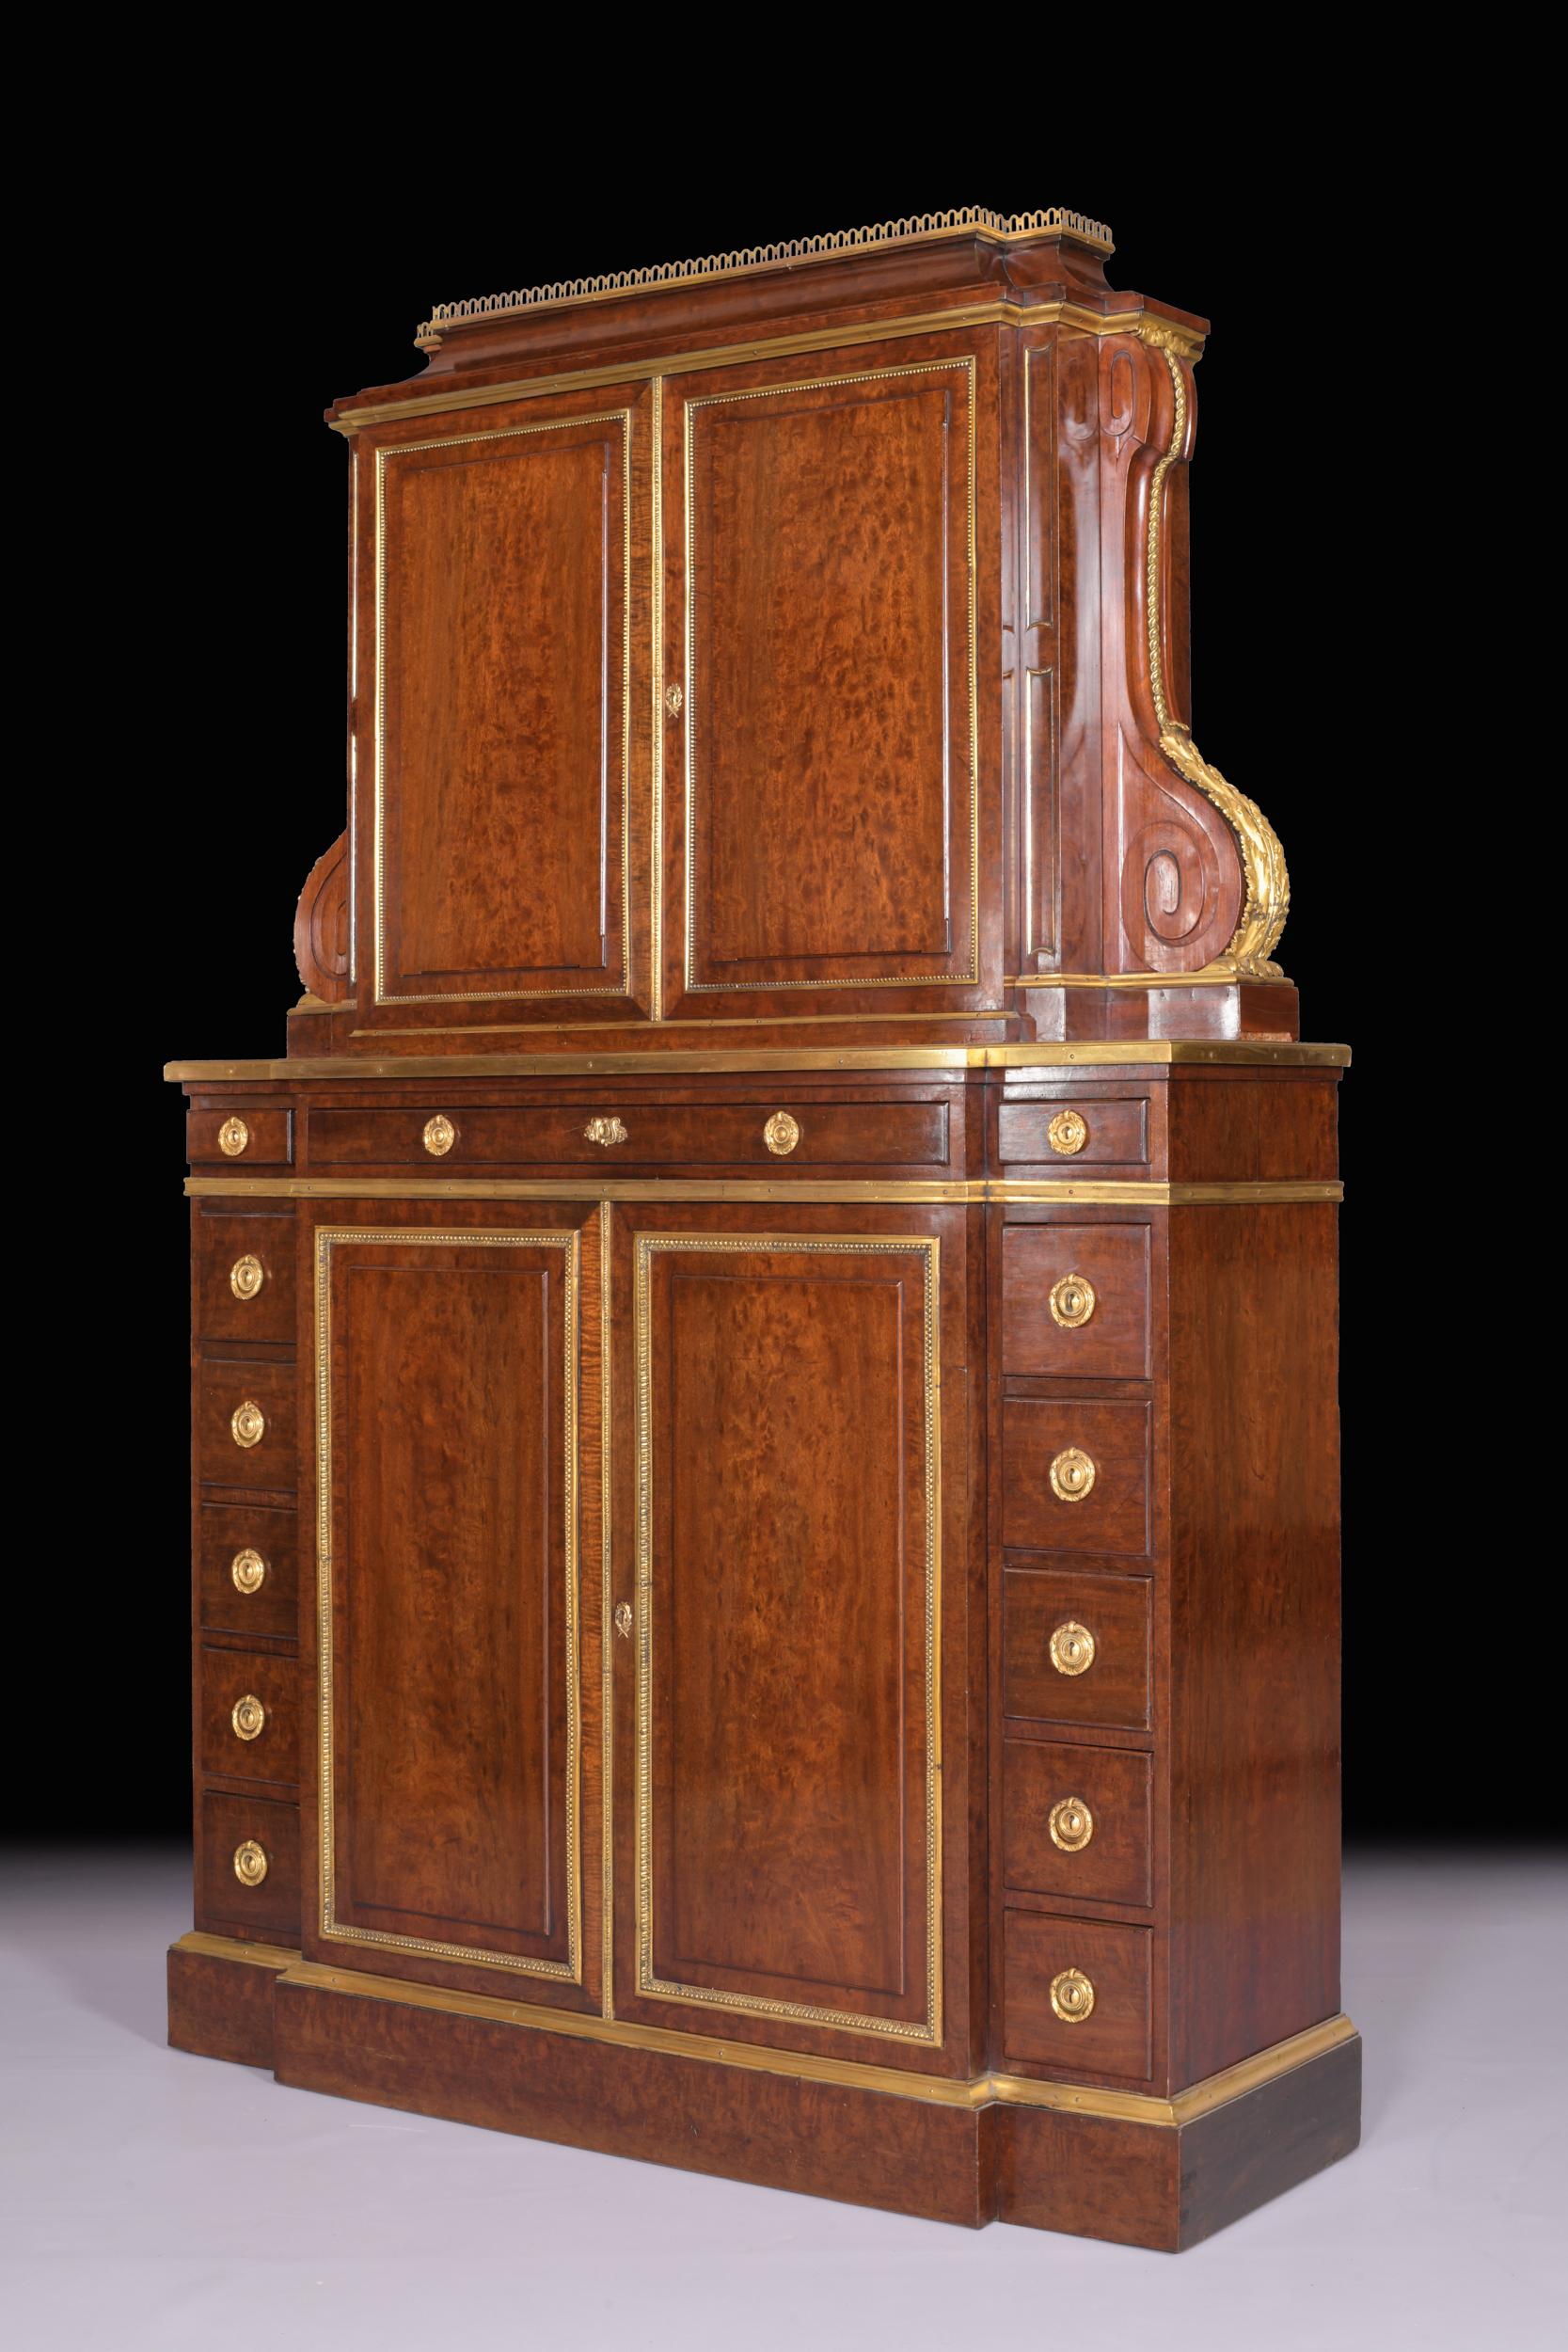 Victorian 19th Century English Mahogany Collectors Cabinet by C. Mellier & Co